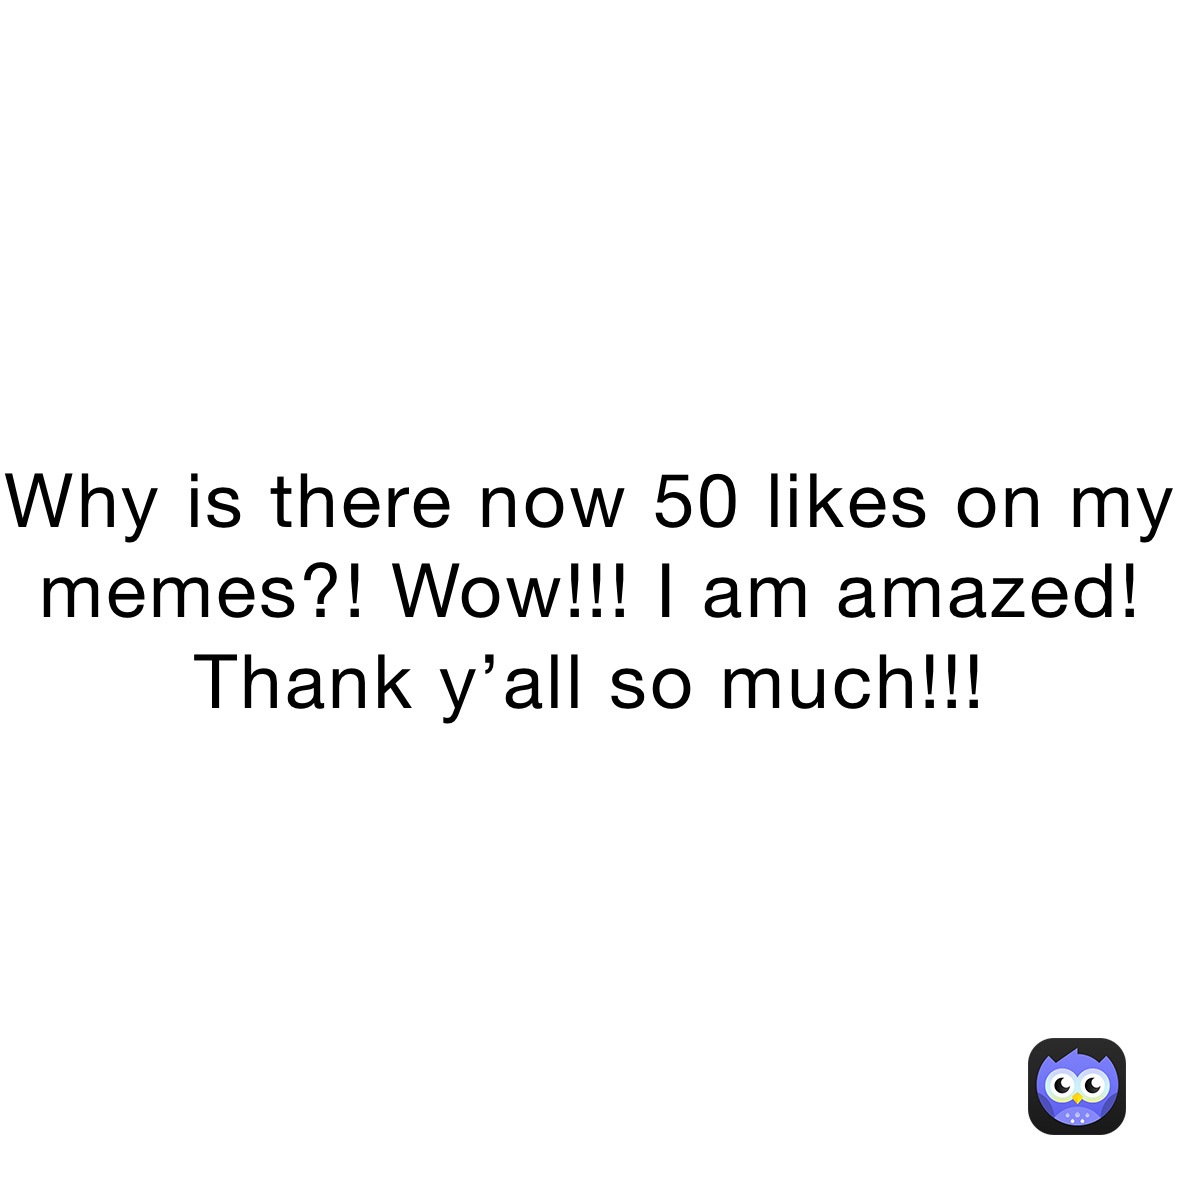 Why is there now 50 likes on my memes?! Wow!!! I am amazed! Thank y’all so much!!!